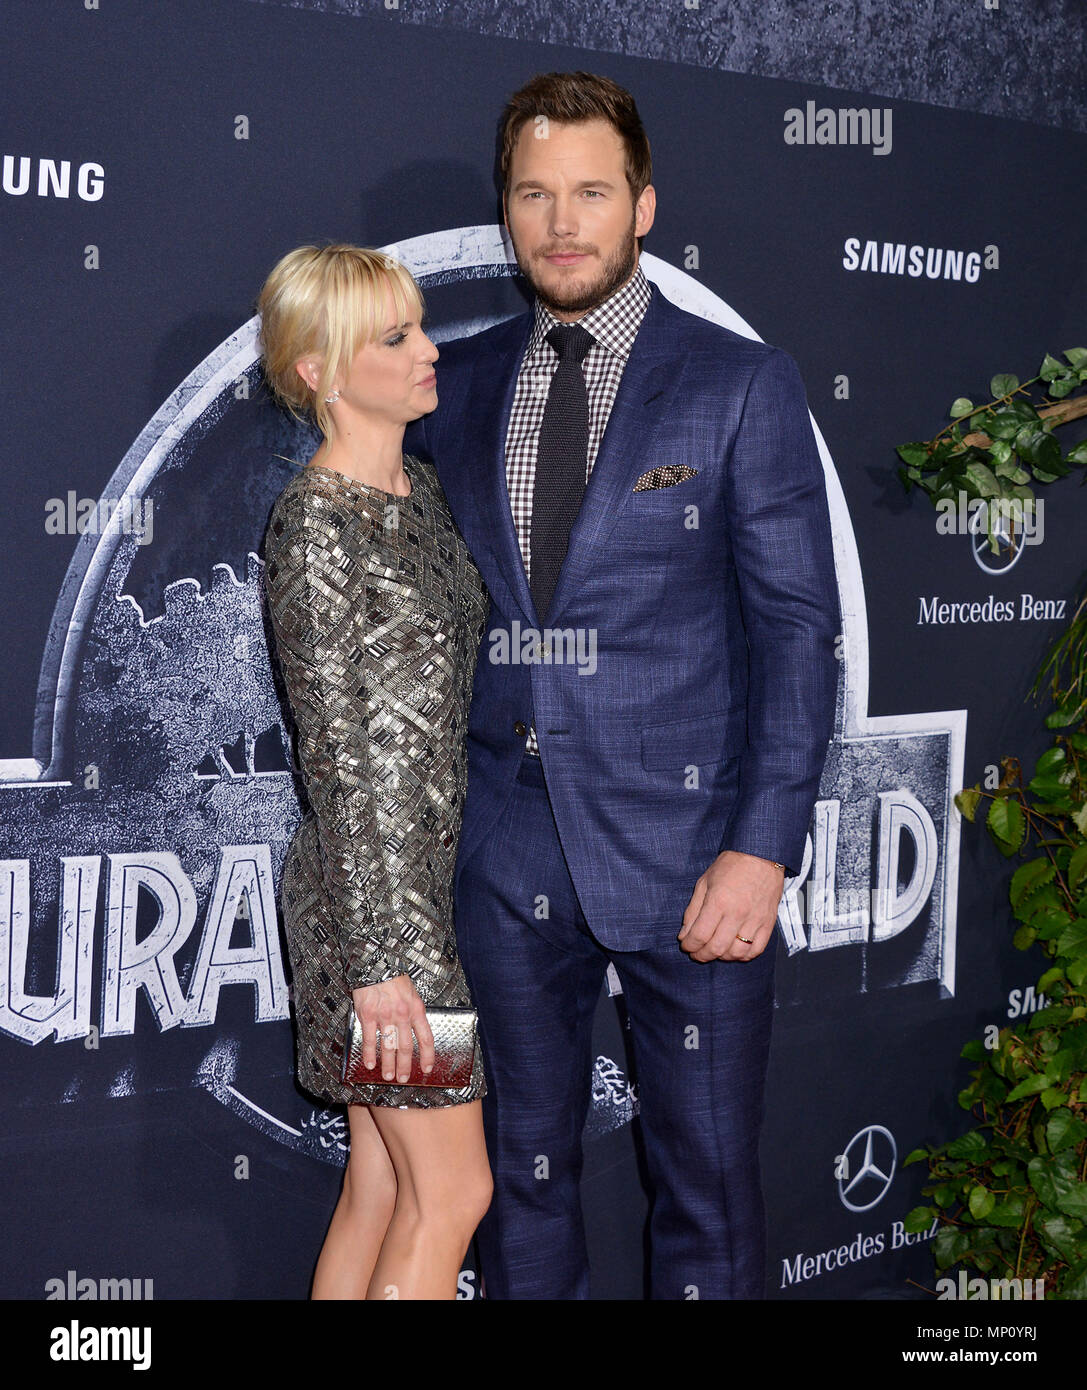 Anna Faris, Chris Pratt 058 at the Jurassic World Premiere at the Hollywood and Highland, Dolby Theatre in Los Angeles.. June, 9, 2015.Anna Faris, Chris Pratt 058 ------------- Red Carpet Event, Vertical, USA, Film Industry, Celebrities,  Photography, Bestof, Arts Culture and Entertainment, Topix Celebrities fashion /  Vertical, Best of, Event in Hollywood Life - California,  Red Carpet and backstage, USA, Film Industry, Celebrities,  movie celebrities, TV celebrities, Music celebrities, Photography, Bestof, Arts Culture and Entertainment,  Topix, vertical,  family from from the year , 2015, i Stock Photo